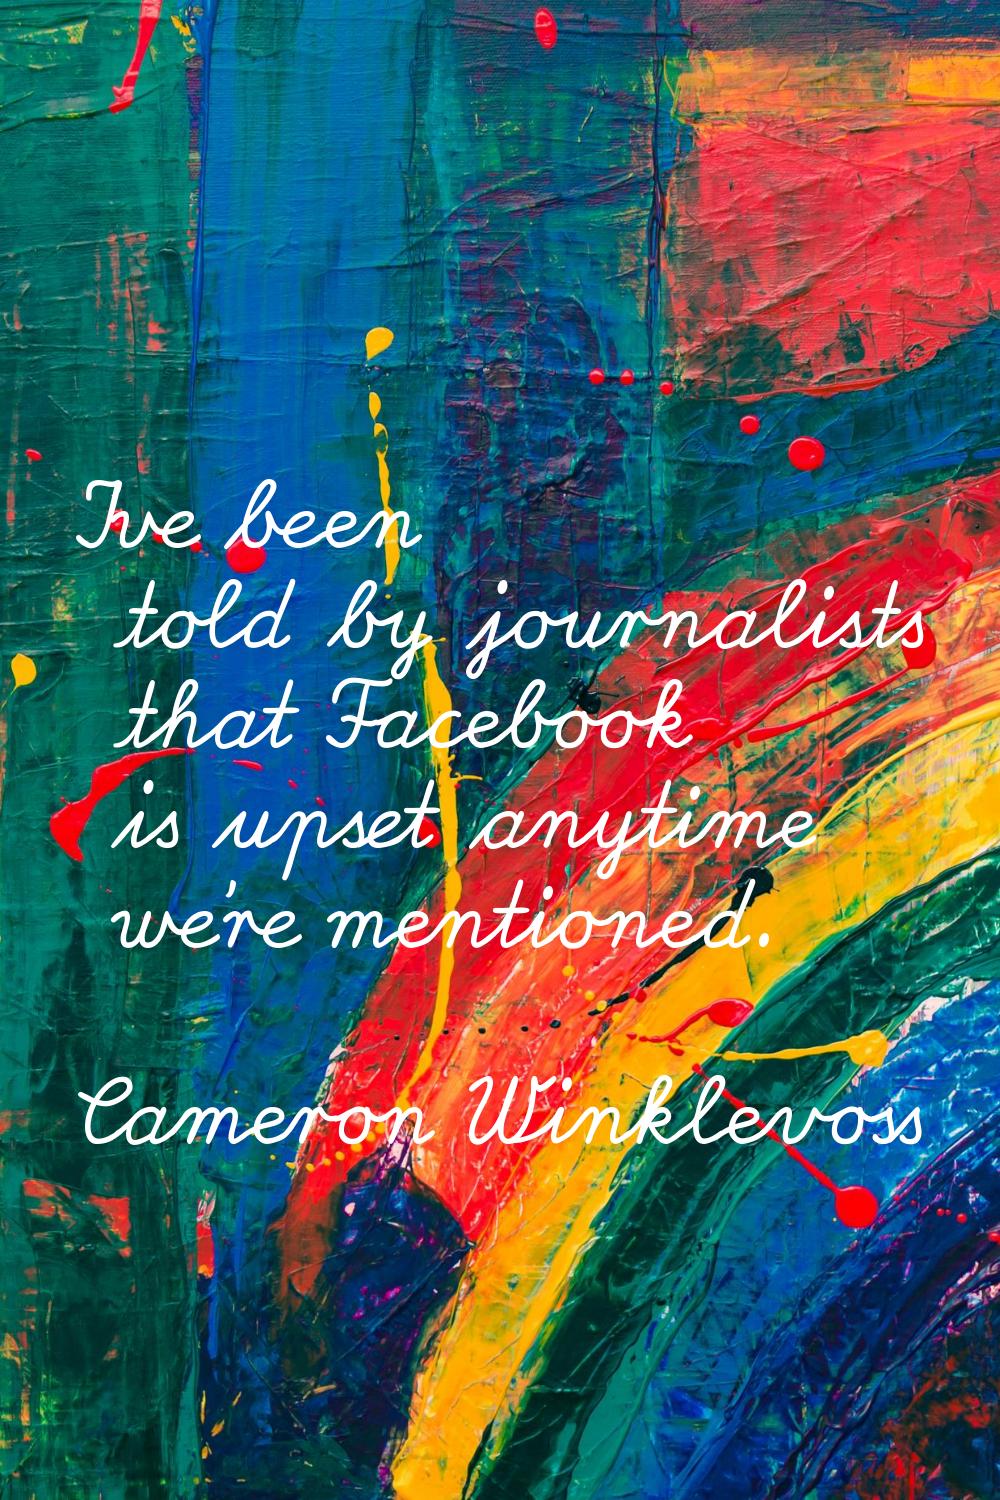 I've been told by journalists that Facebook is upset anytime we're mentioned.